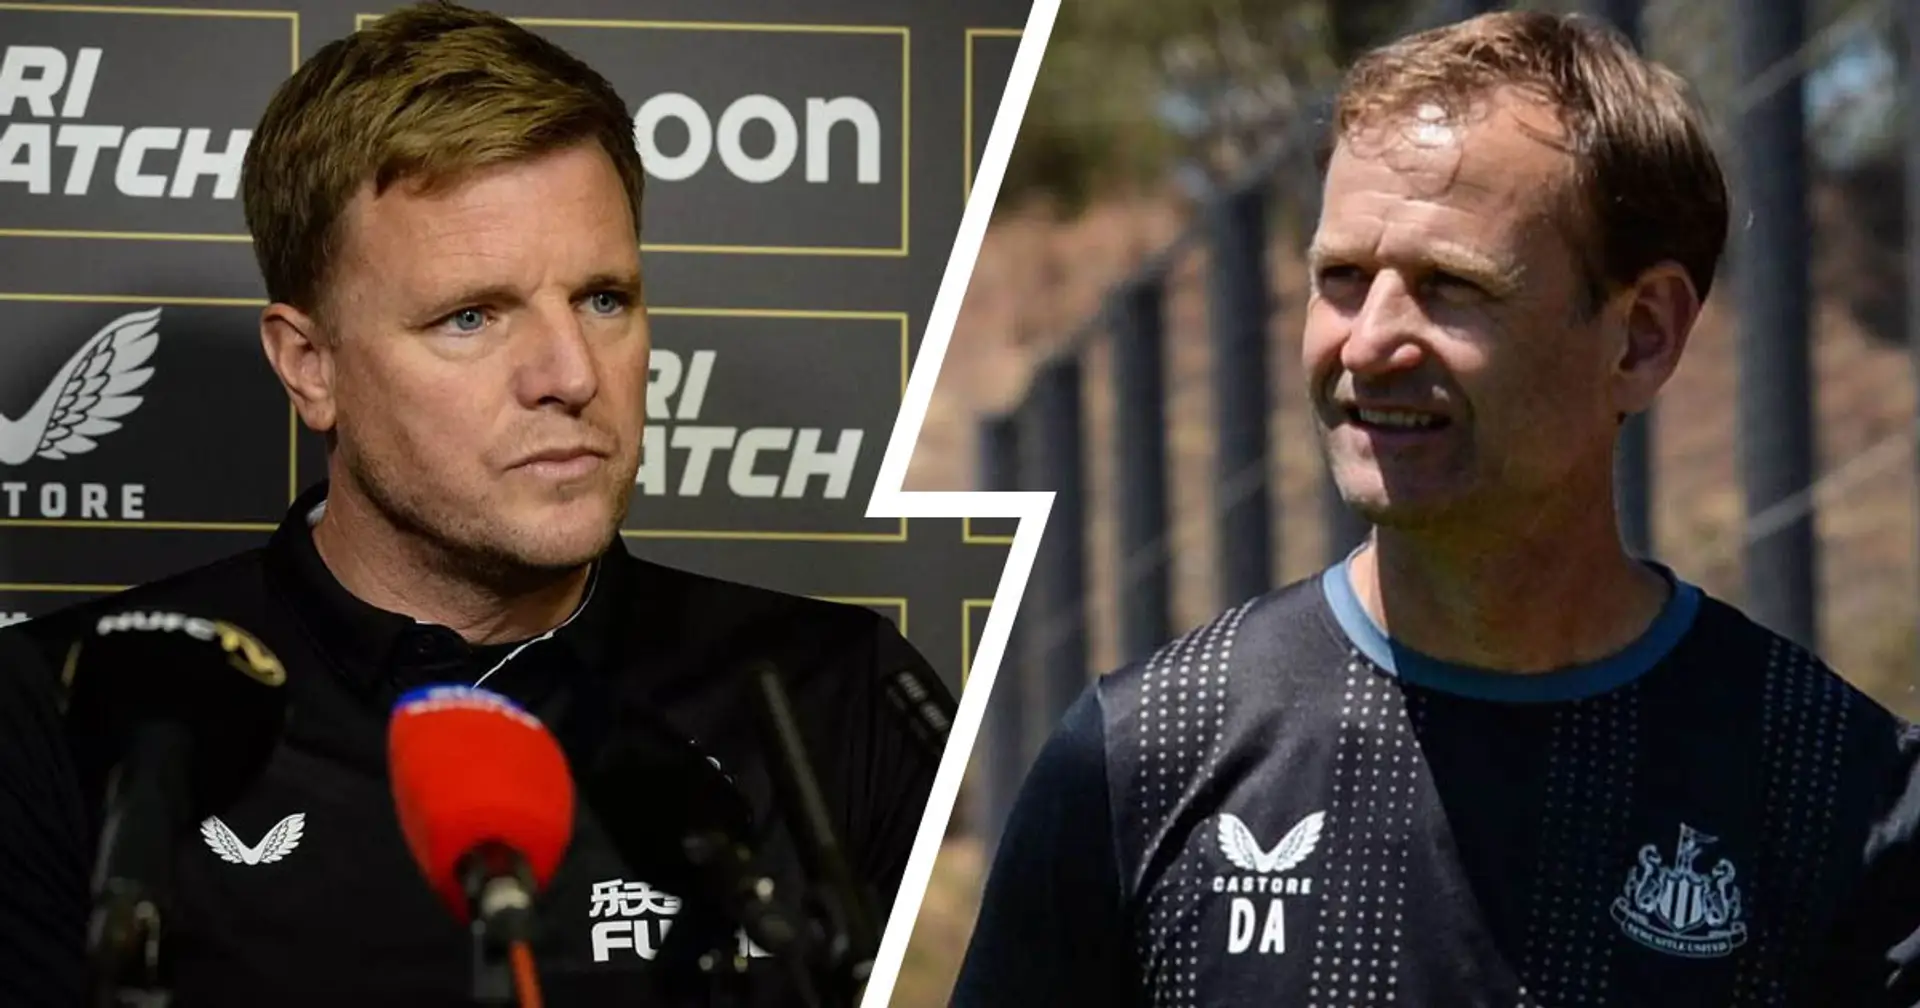 'We're very protective': Newcastle United boss Howe reveals stance on Man United links with Dan Ashworth